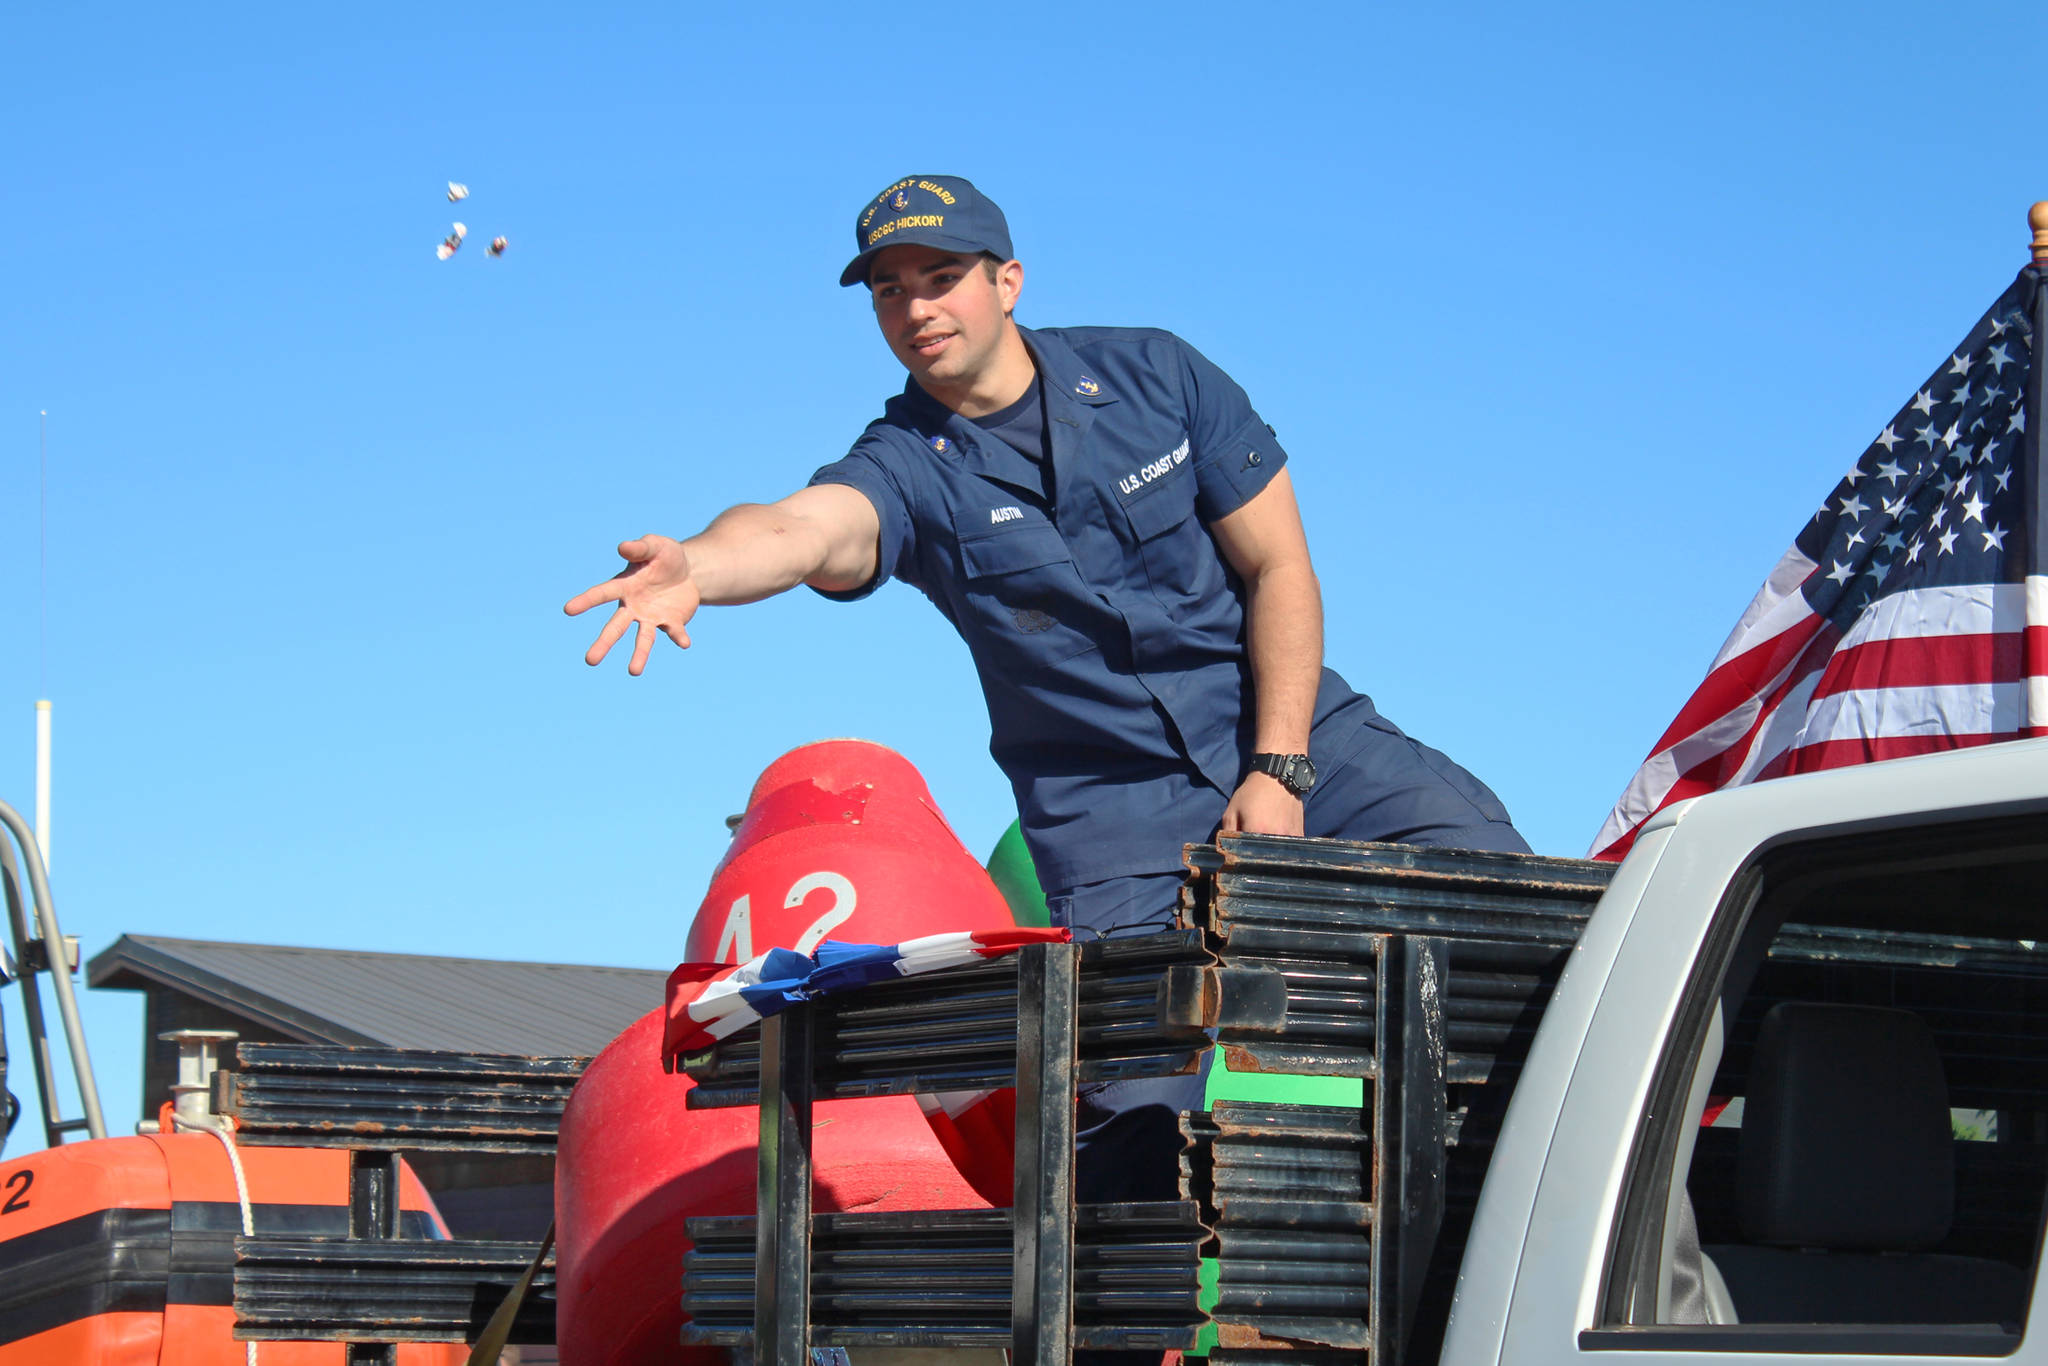 A member of the U.S. Coast Guard tosses candy to children and families lining Pioneer Avenue during the annual Independence Day parade Wednesday, July 4, 2018 in Homer, Alaska. Coast Guard participants were representing the U.S. Coast Guard Cutter Hickory, also called the “Bull of the North.” (Photo by Megan Pacer/Homer News)                                A member of the U.S. Coast Guard tosses candy to children and families lining Pioneer Avenue during the annual Independence Day parade Wednesday, July 4, 2018 in Homer, Alaska. Coast Guard participants were representing the U.S. Coast Guard Cutter Hickory, also called the “Bull of the North.” (Photo by Megan Pacer/Homer News)